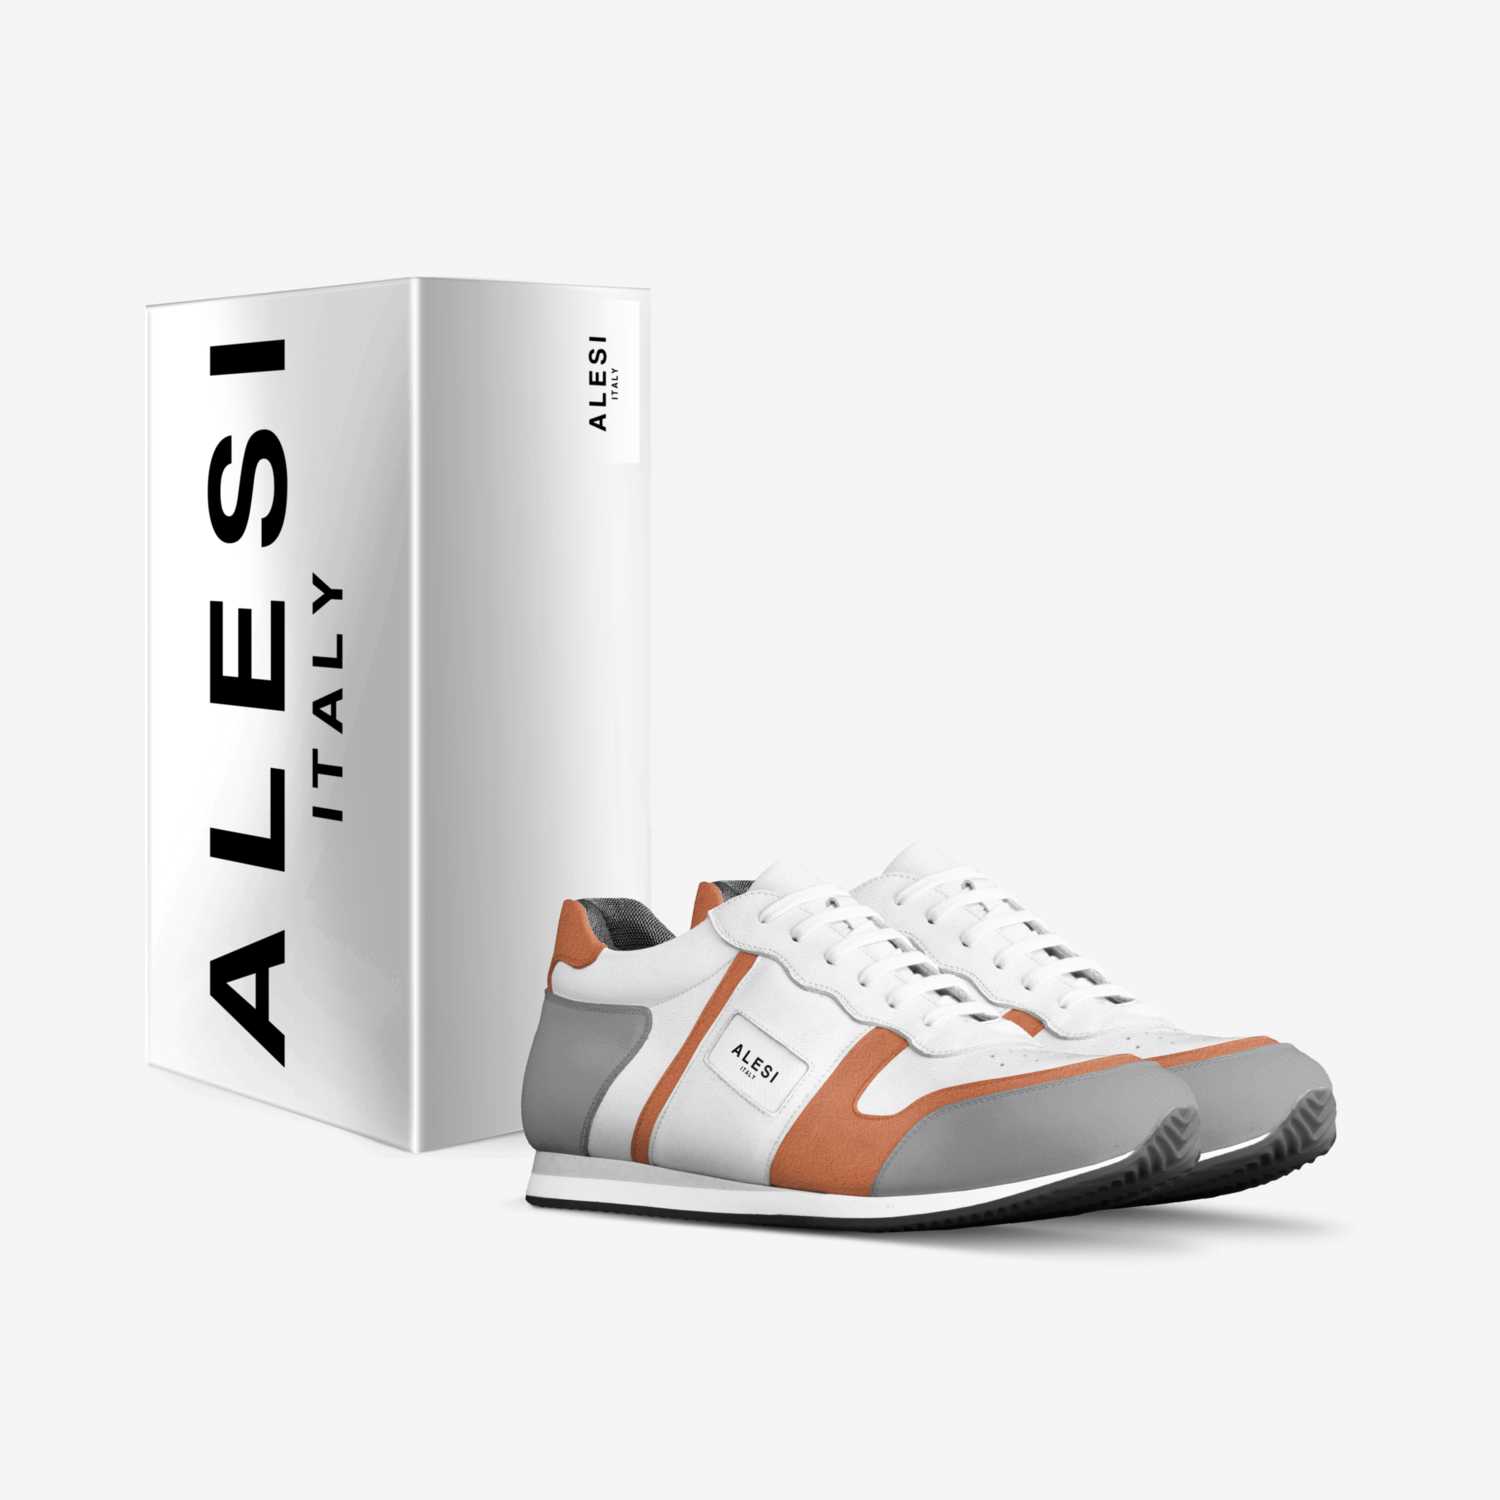 ALESI RUNNER II custom made in Italy shoes by Lonanthony Parker | Box view